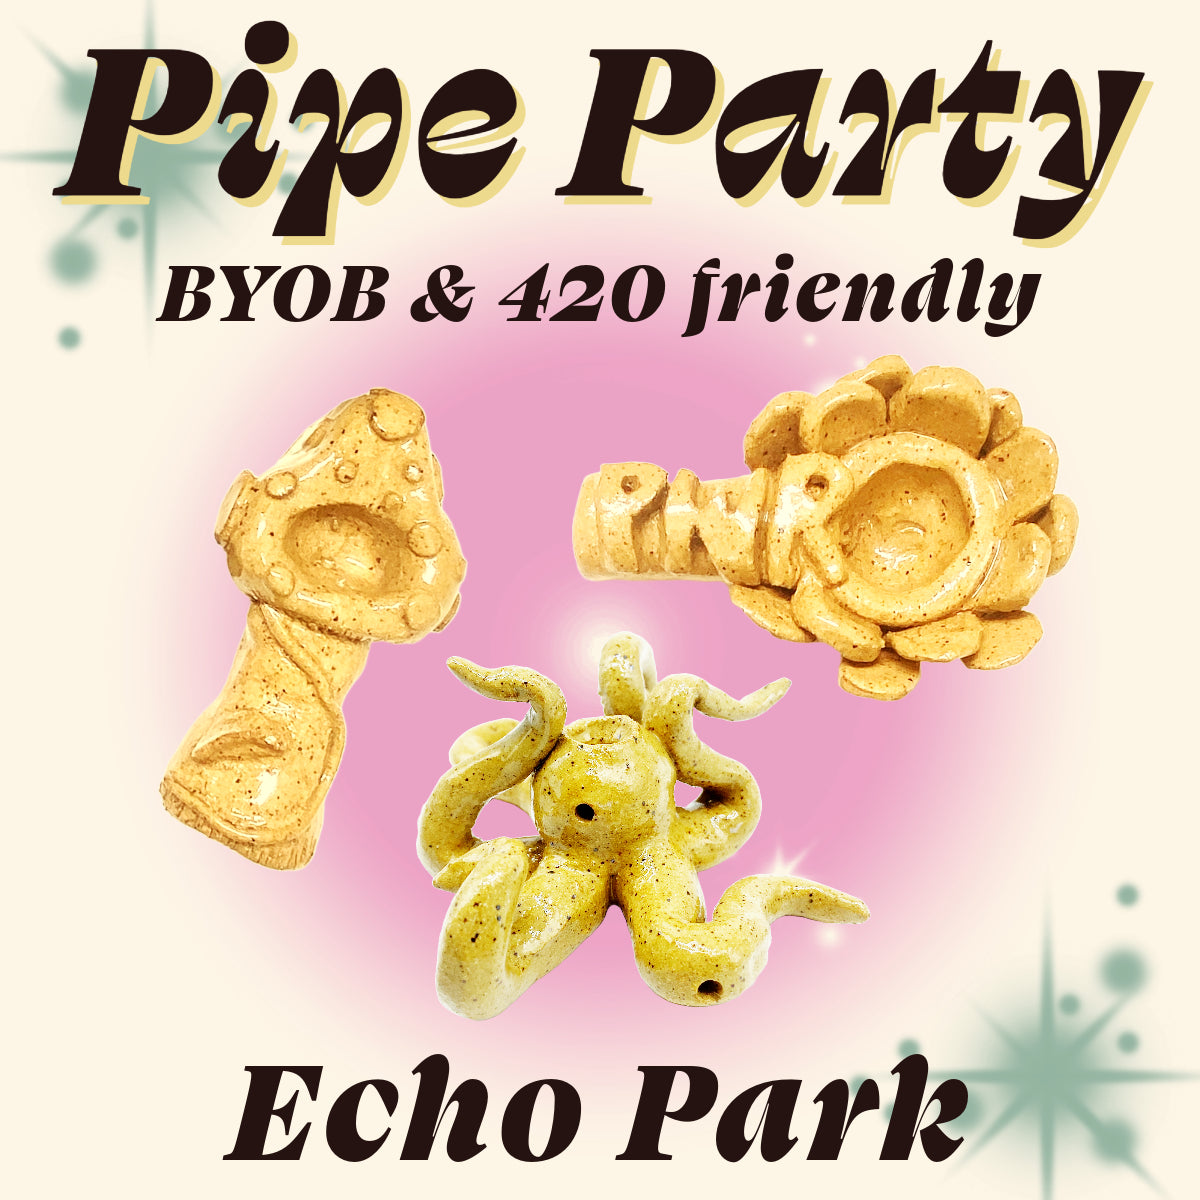 Pipe Party [Echo Park]